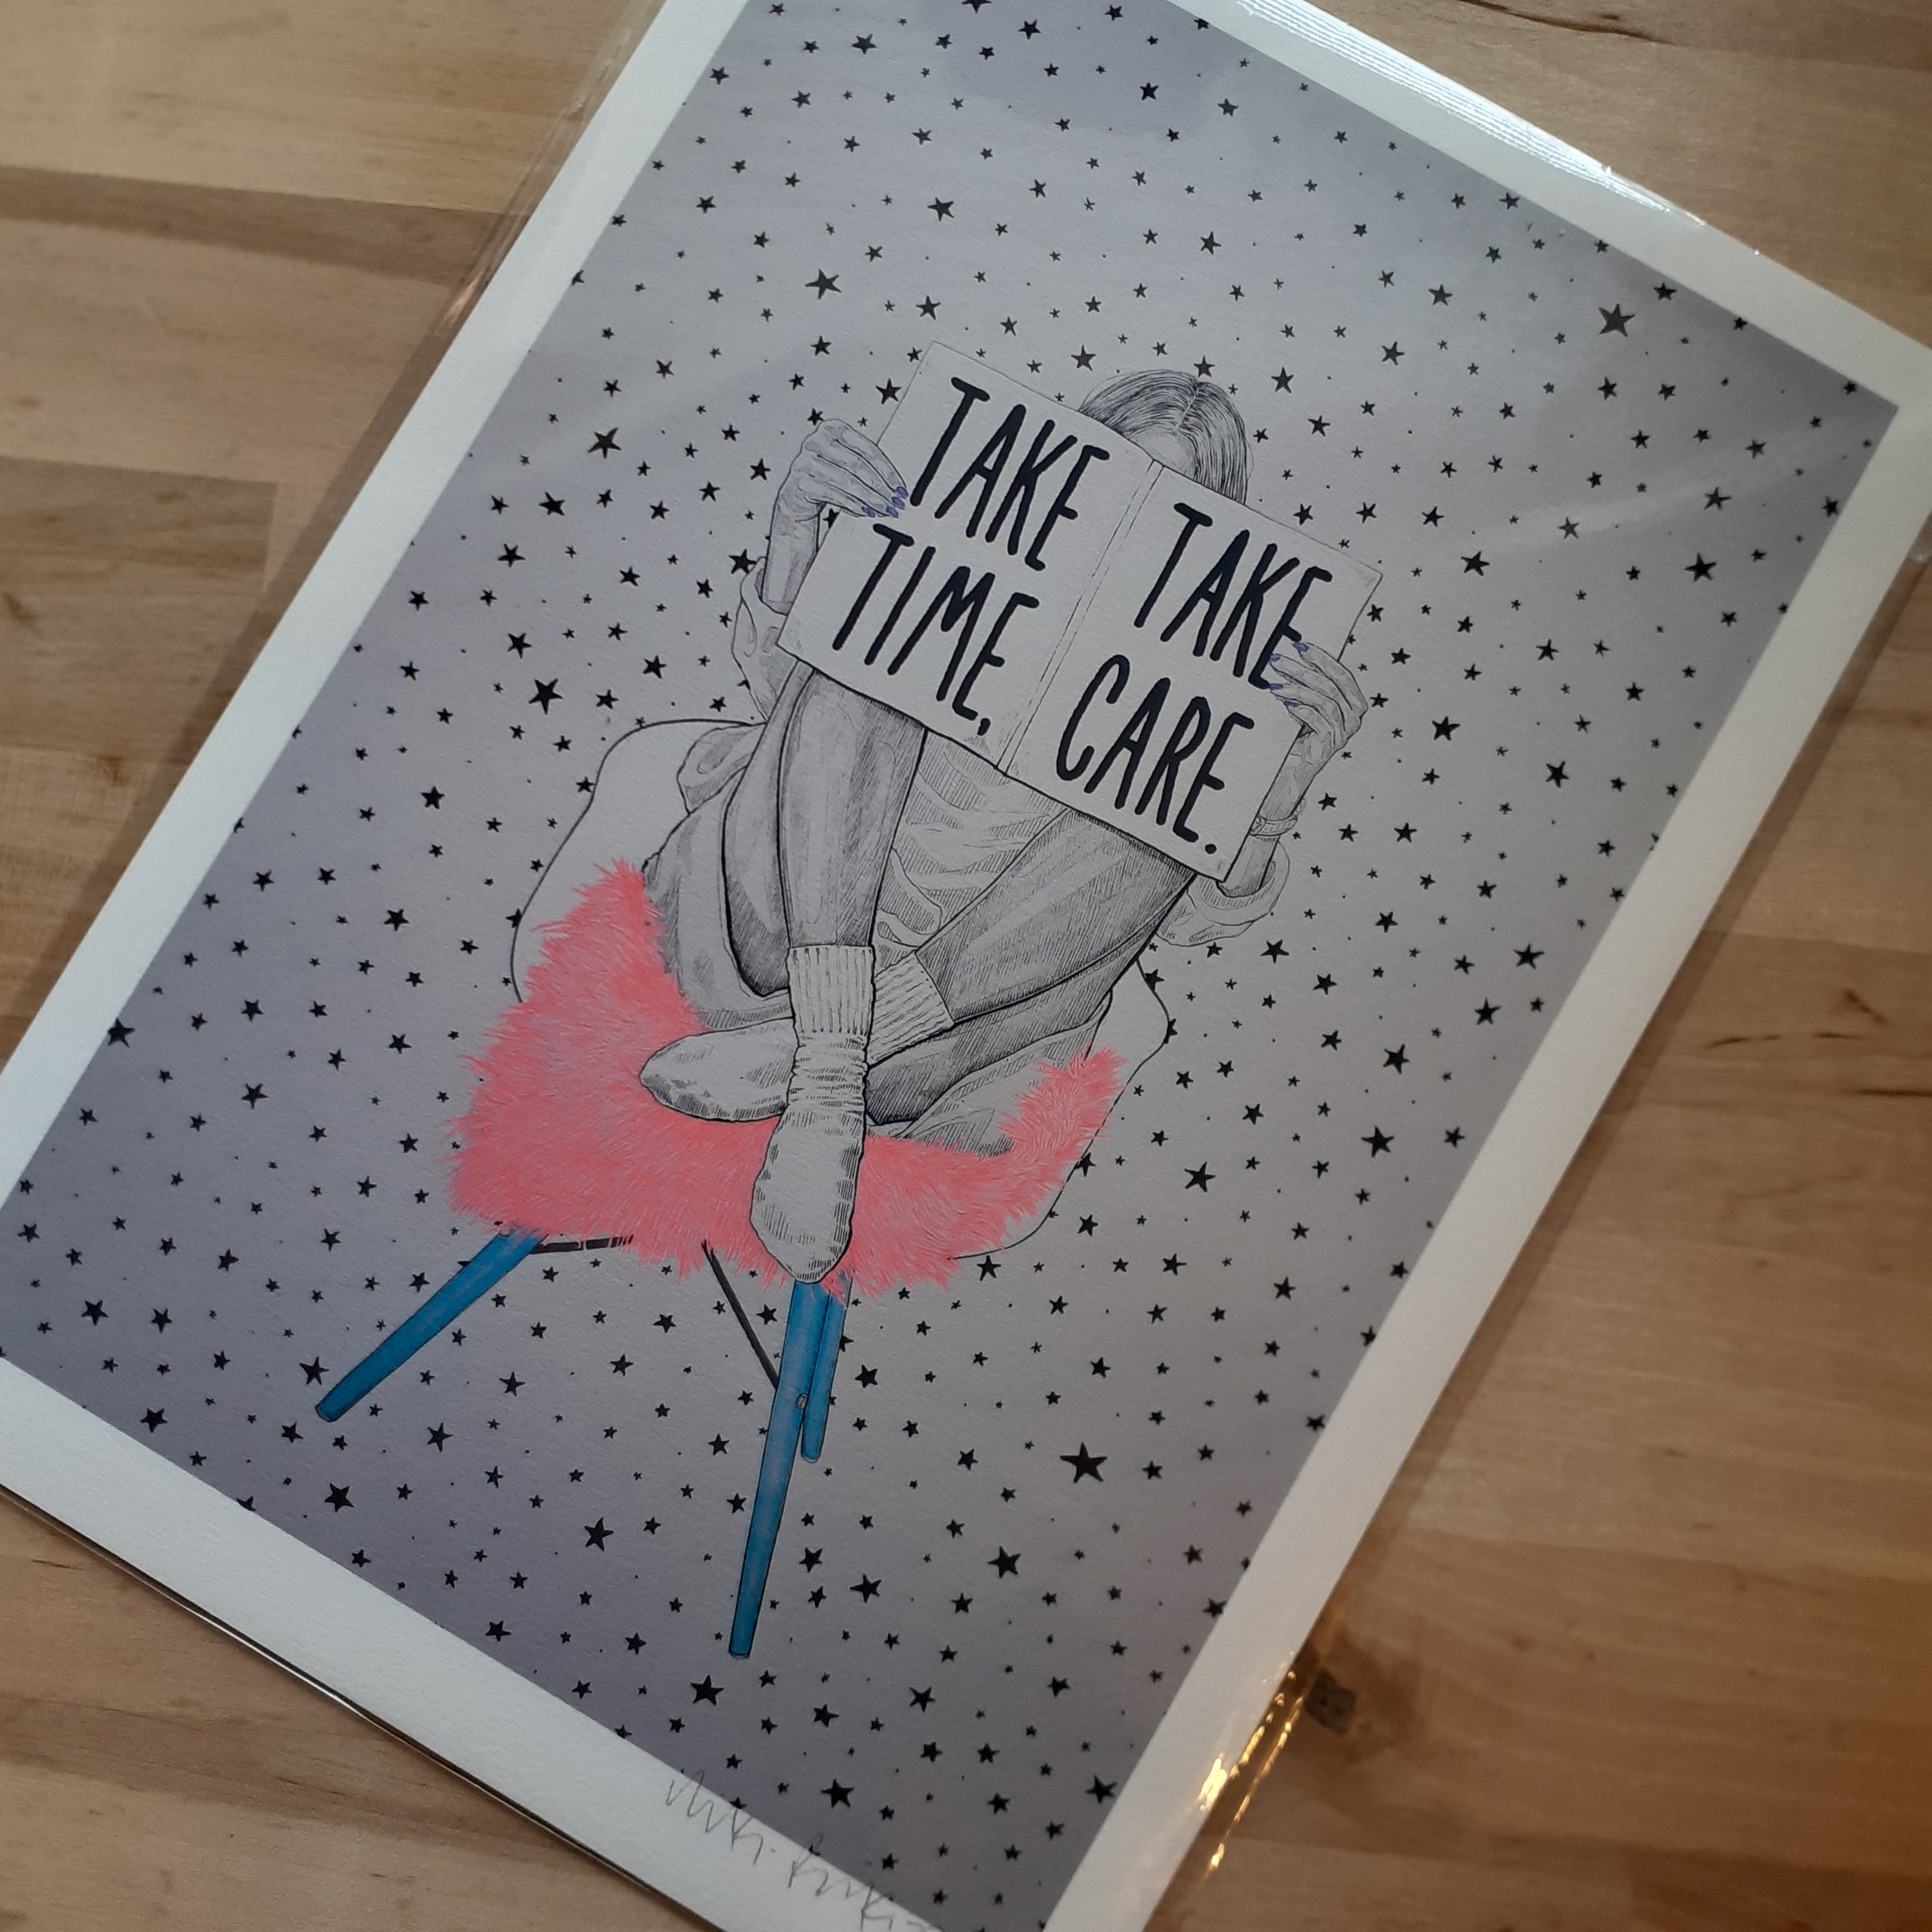 "Take Time, Take Care" - hand signed A4 Print - Luvit!